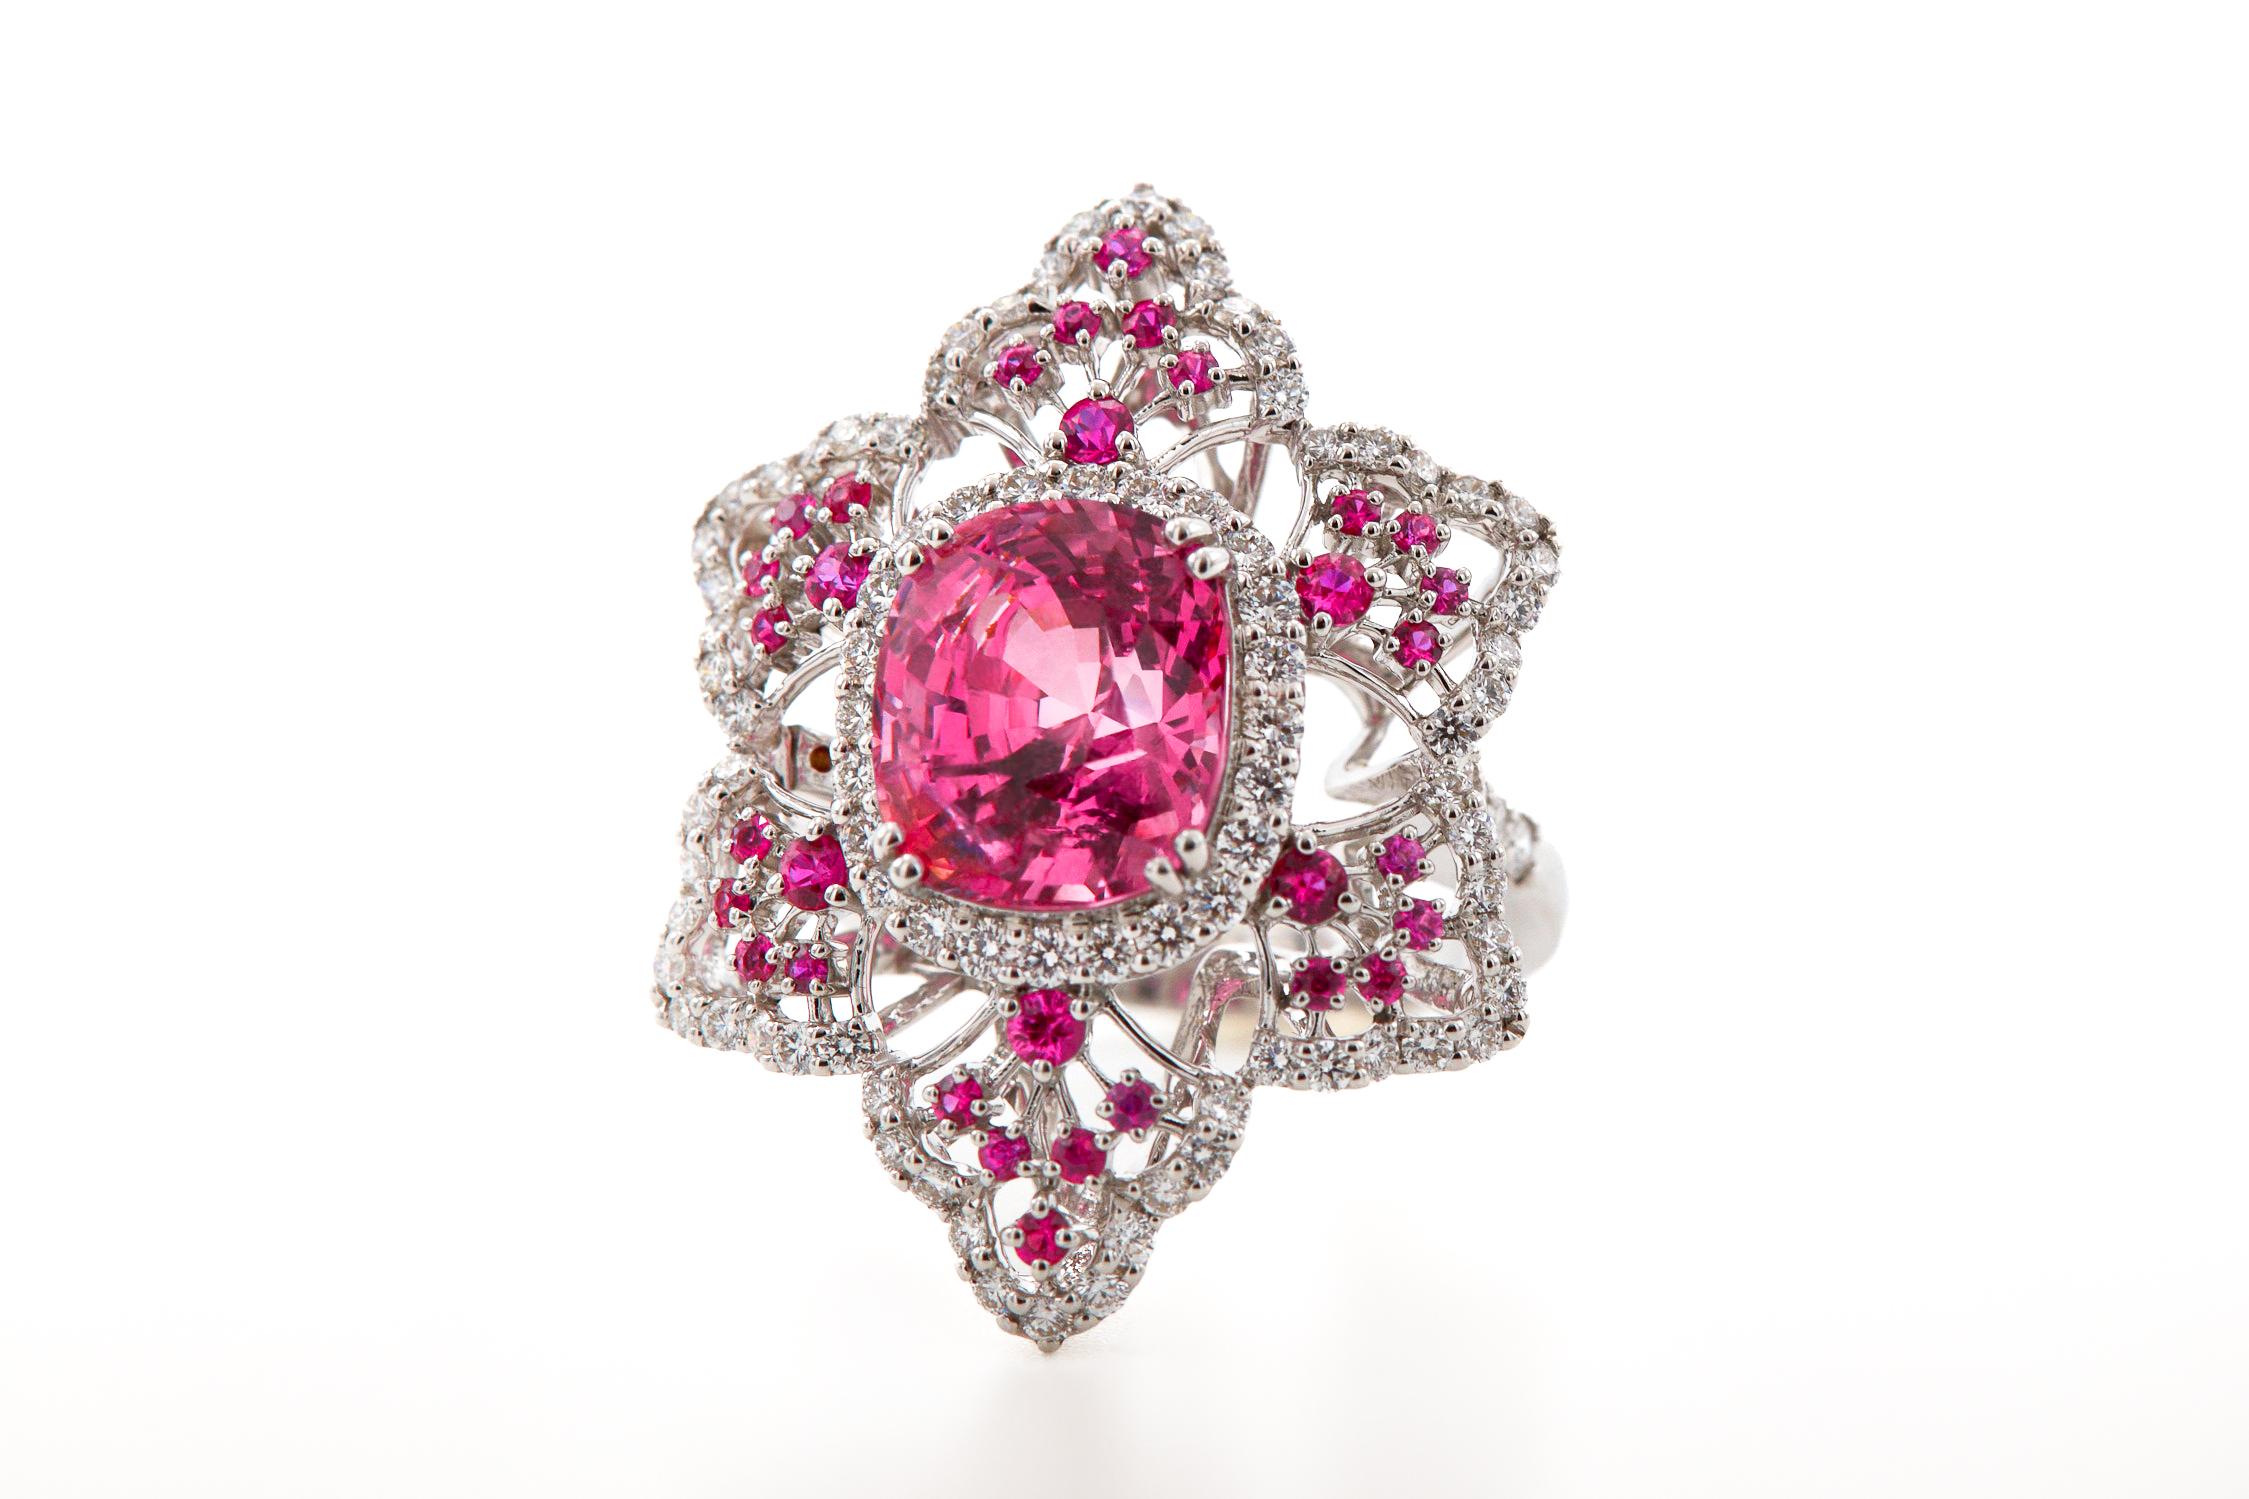 Cushion Cut 5.64 Carats Burmese Spinel, Pink Sapphire and Diamond Cocktail Ring For Sale